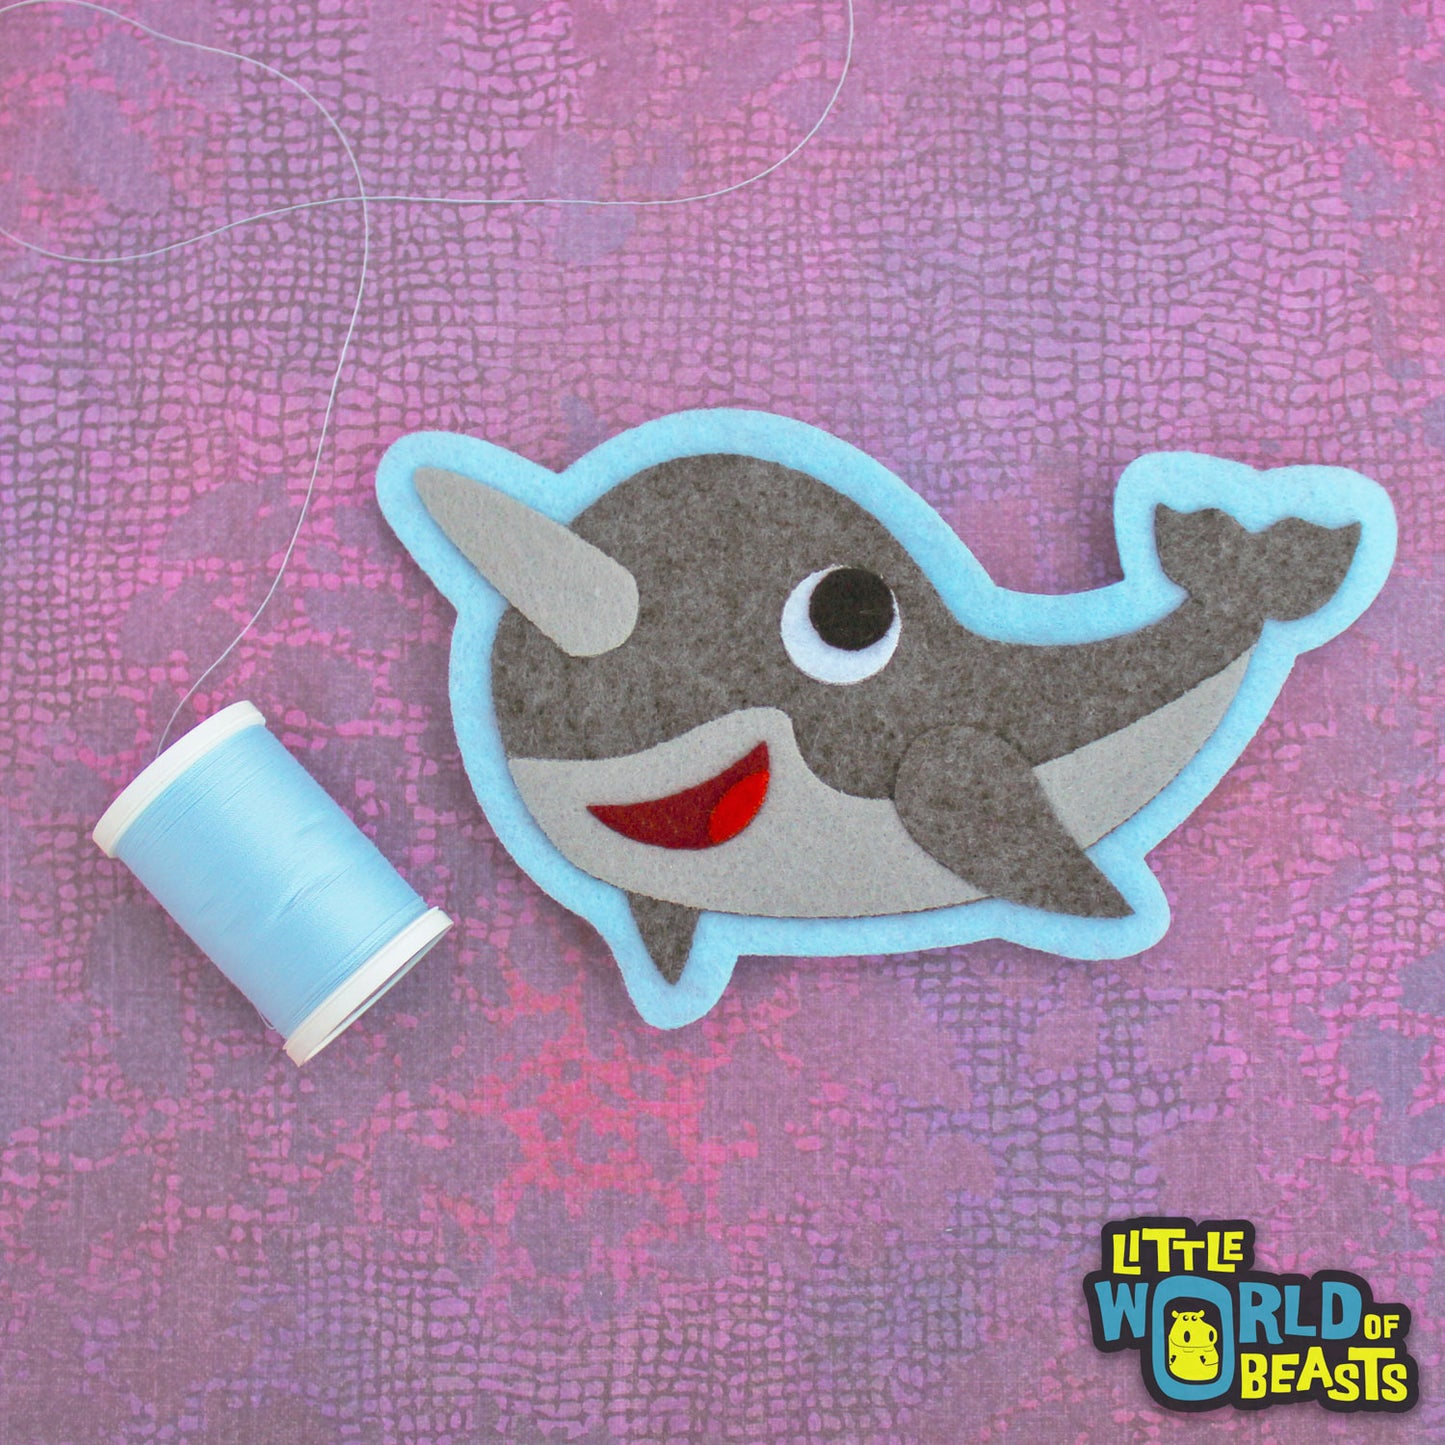 Vinnie the Narwhal - Felt Animal - Sew on Patch - Little World of Beasts